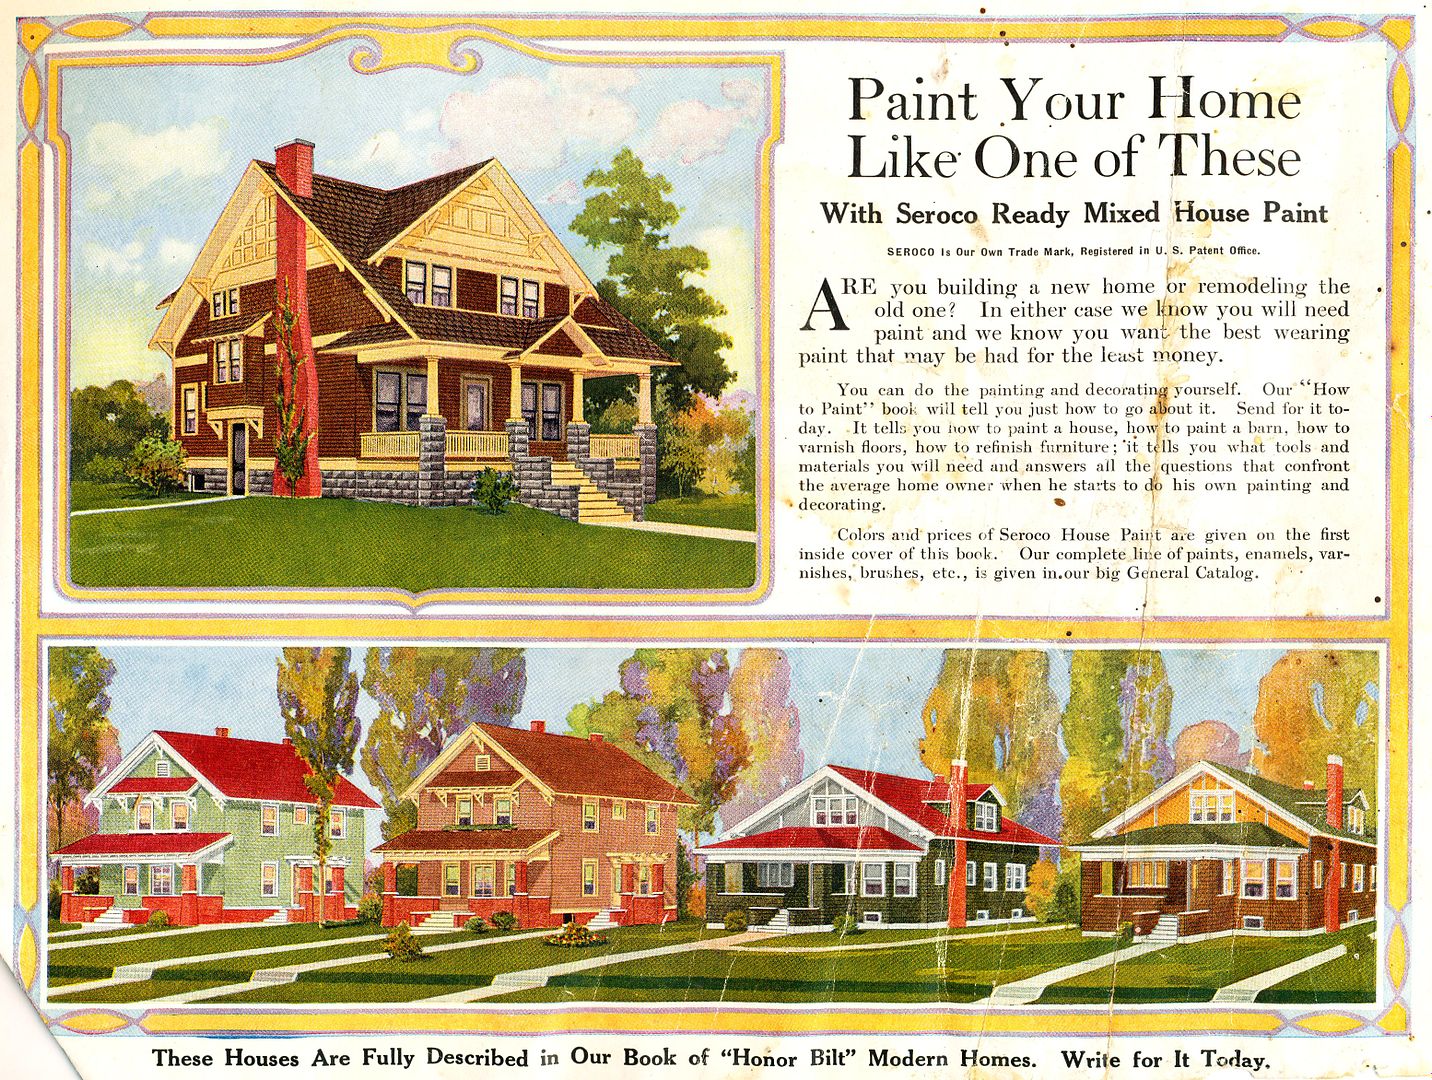 And yet, the back page of the catalog features an advertisement for Seroco Paint (first syllable of Sears, Roebuck and Company), and in that graphic, there are several Sears Homes featured. 